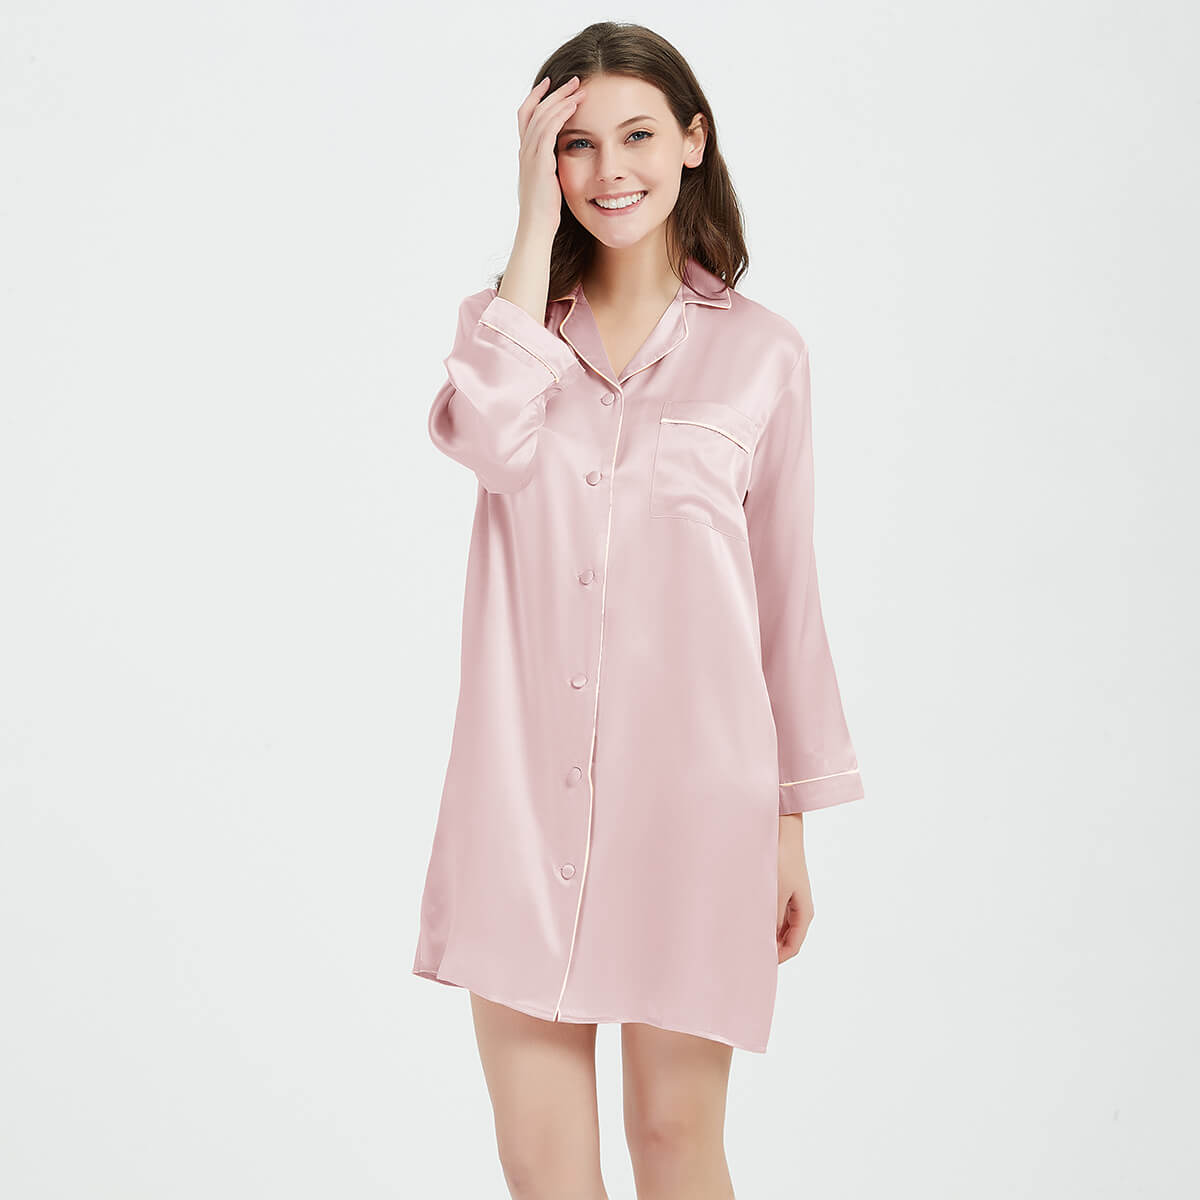 100% pure Mulberry silk nightgown for Women